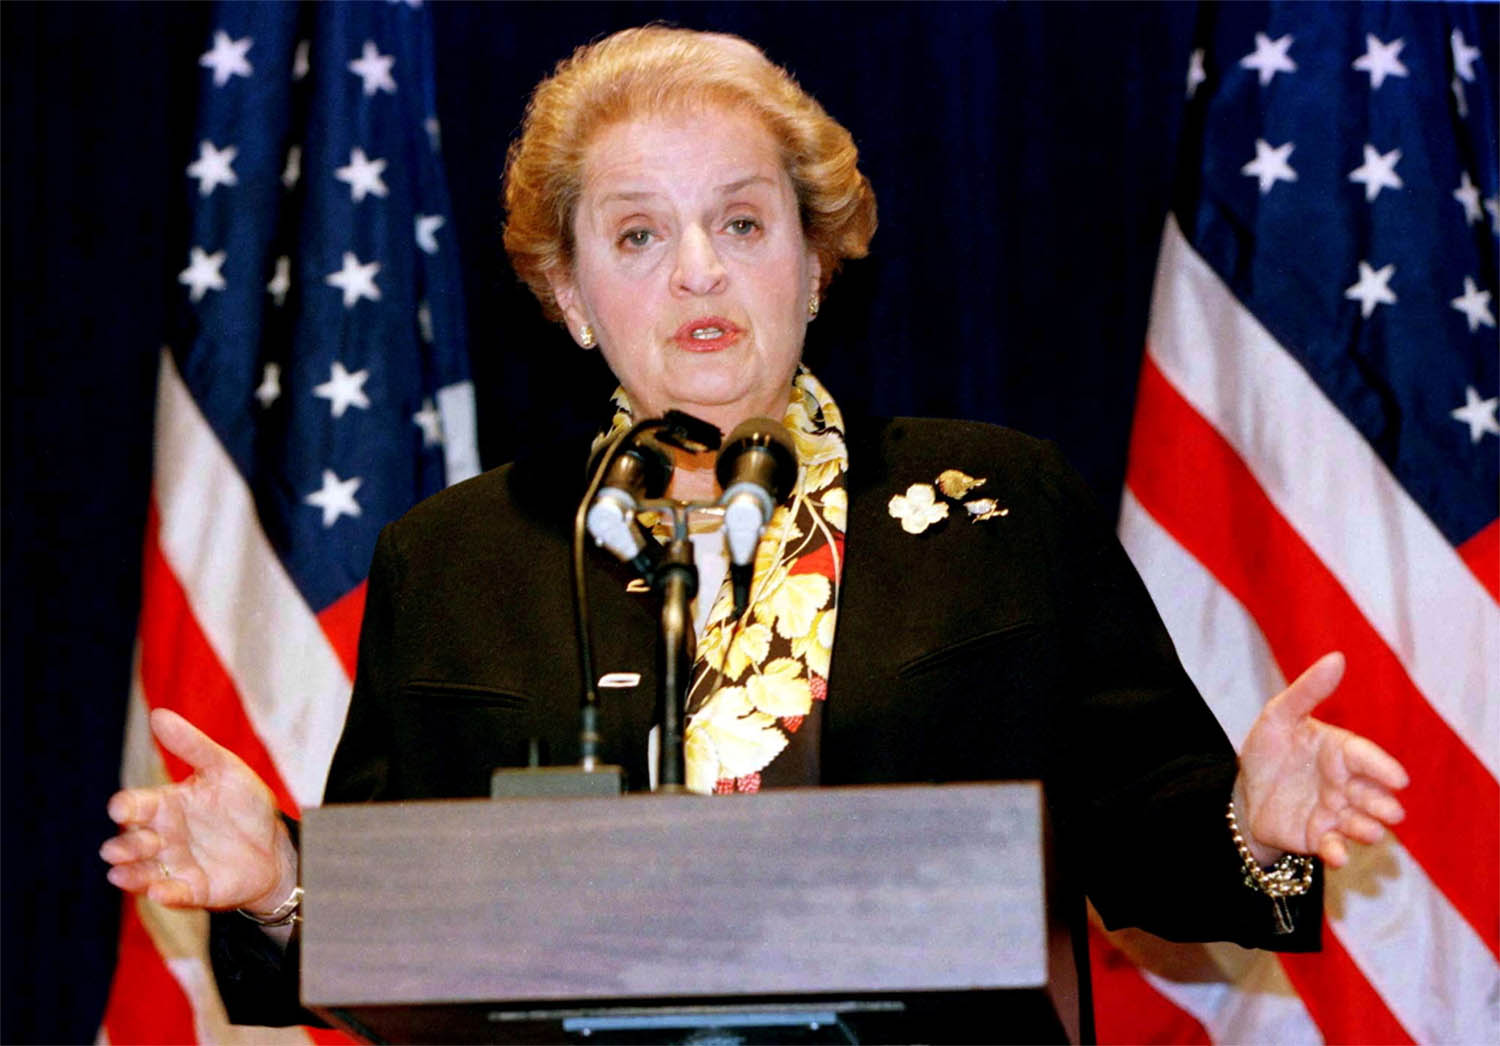 Madeleine Albright was the first woman to serve as American secretary of state (1997-2001)